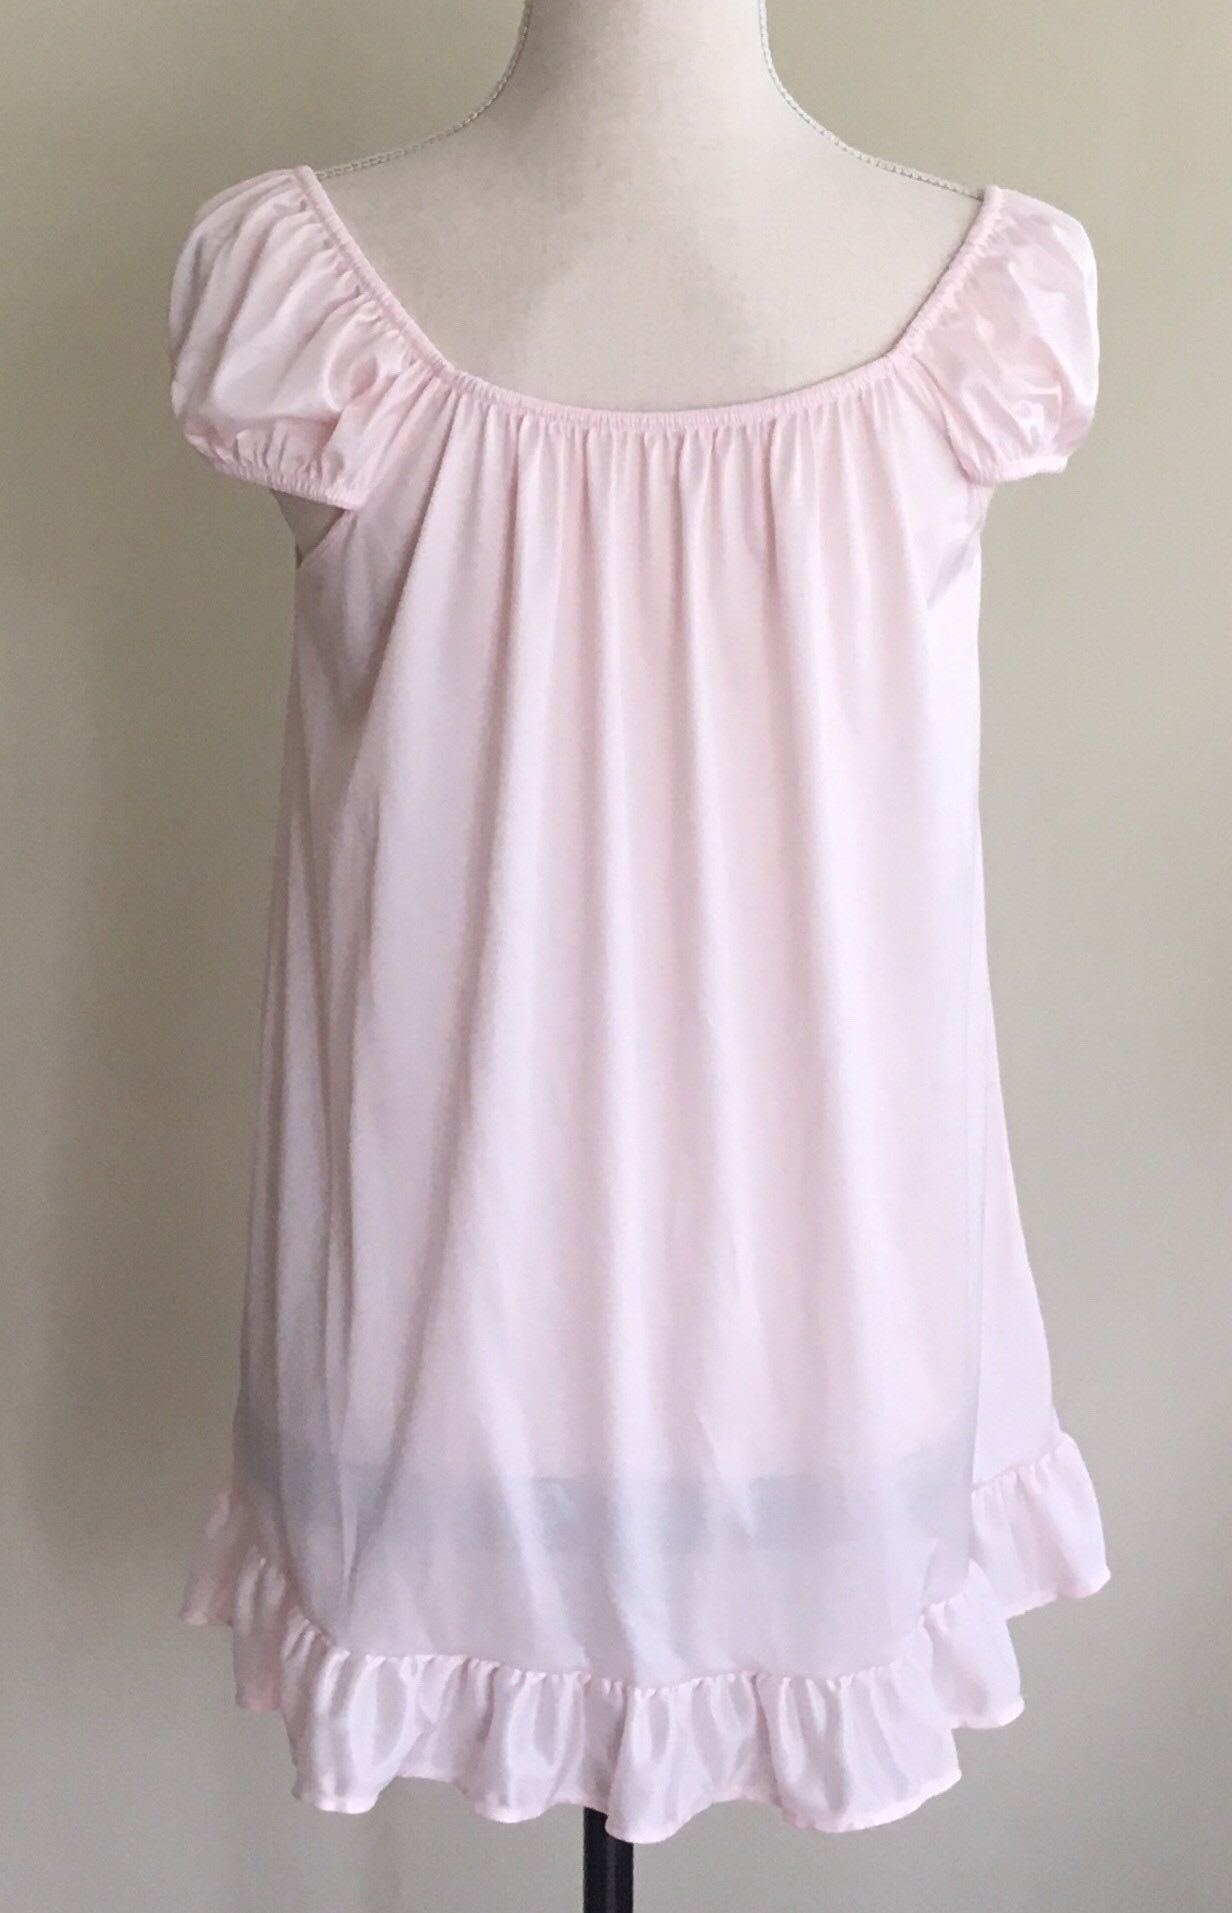 Blush Pink Babydoll Nightie Nightgown Romantic Vintage 50s Lace ...